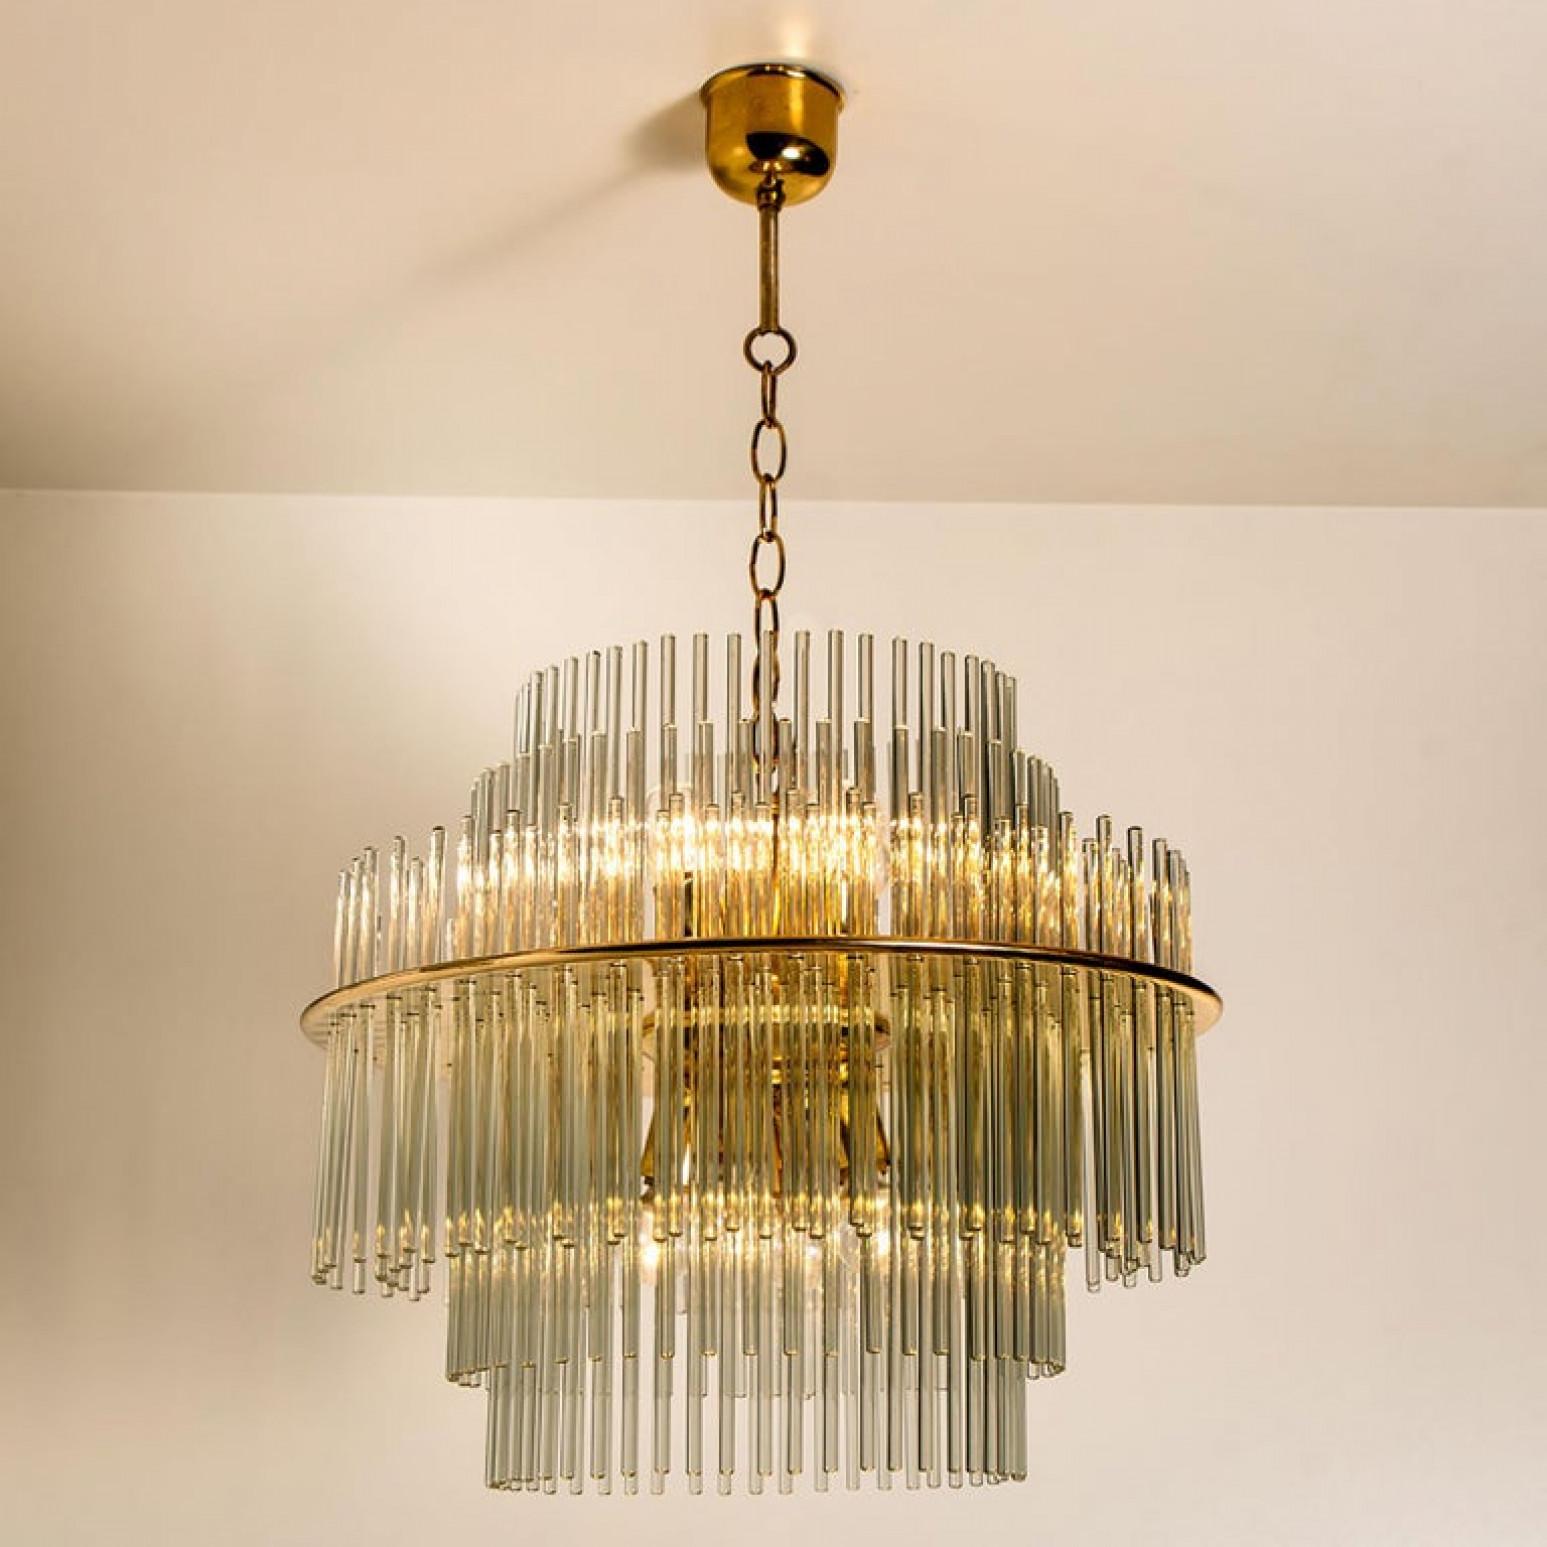 Clean lines to complement all decors. Wonderful high-end light fixture for Lightolier. With brass detail and 192 hanging waterfall glass giving the piece an elegant appearance which refracts the light, filling a room with a soft, warm glow

The